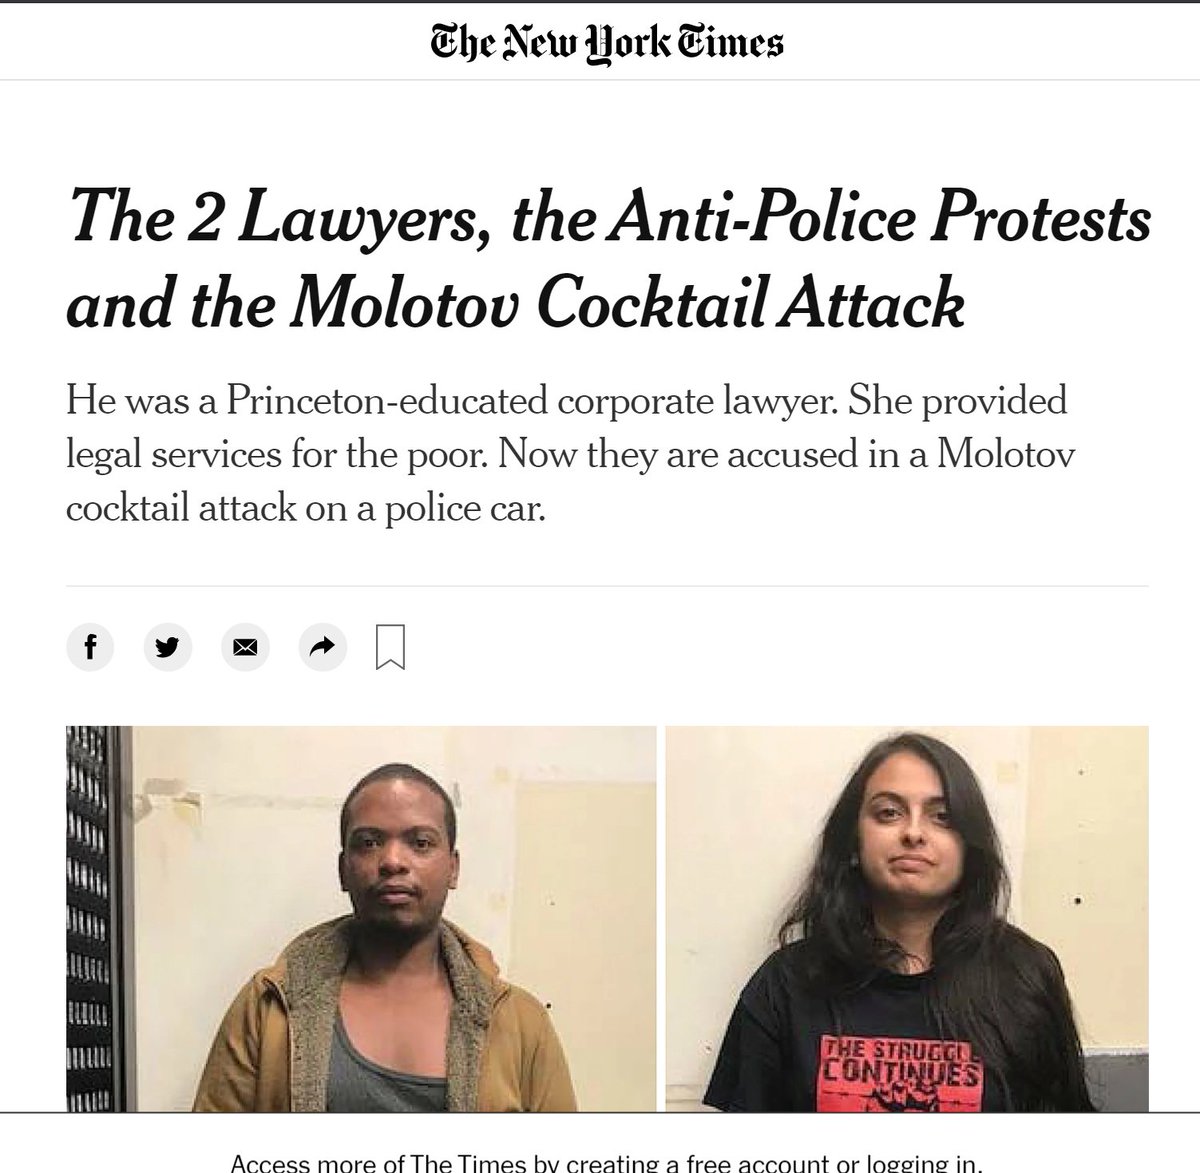 Can we have a discussion on the radicalization that caused these two lawyers to break federal firearms laws and create a bunch of unregistered destructive devices, with the intent to torch police officers?